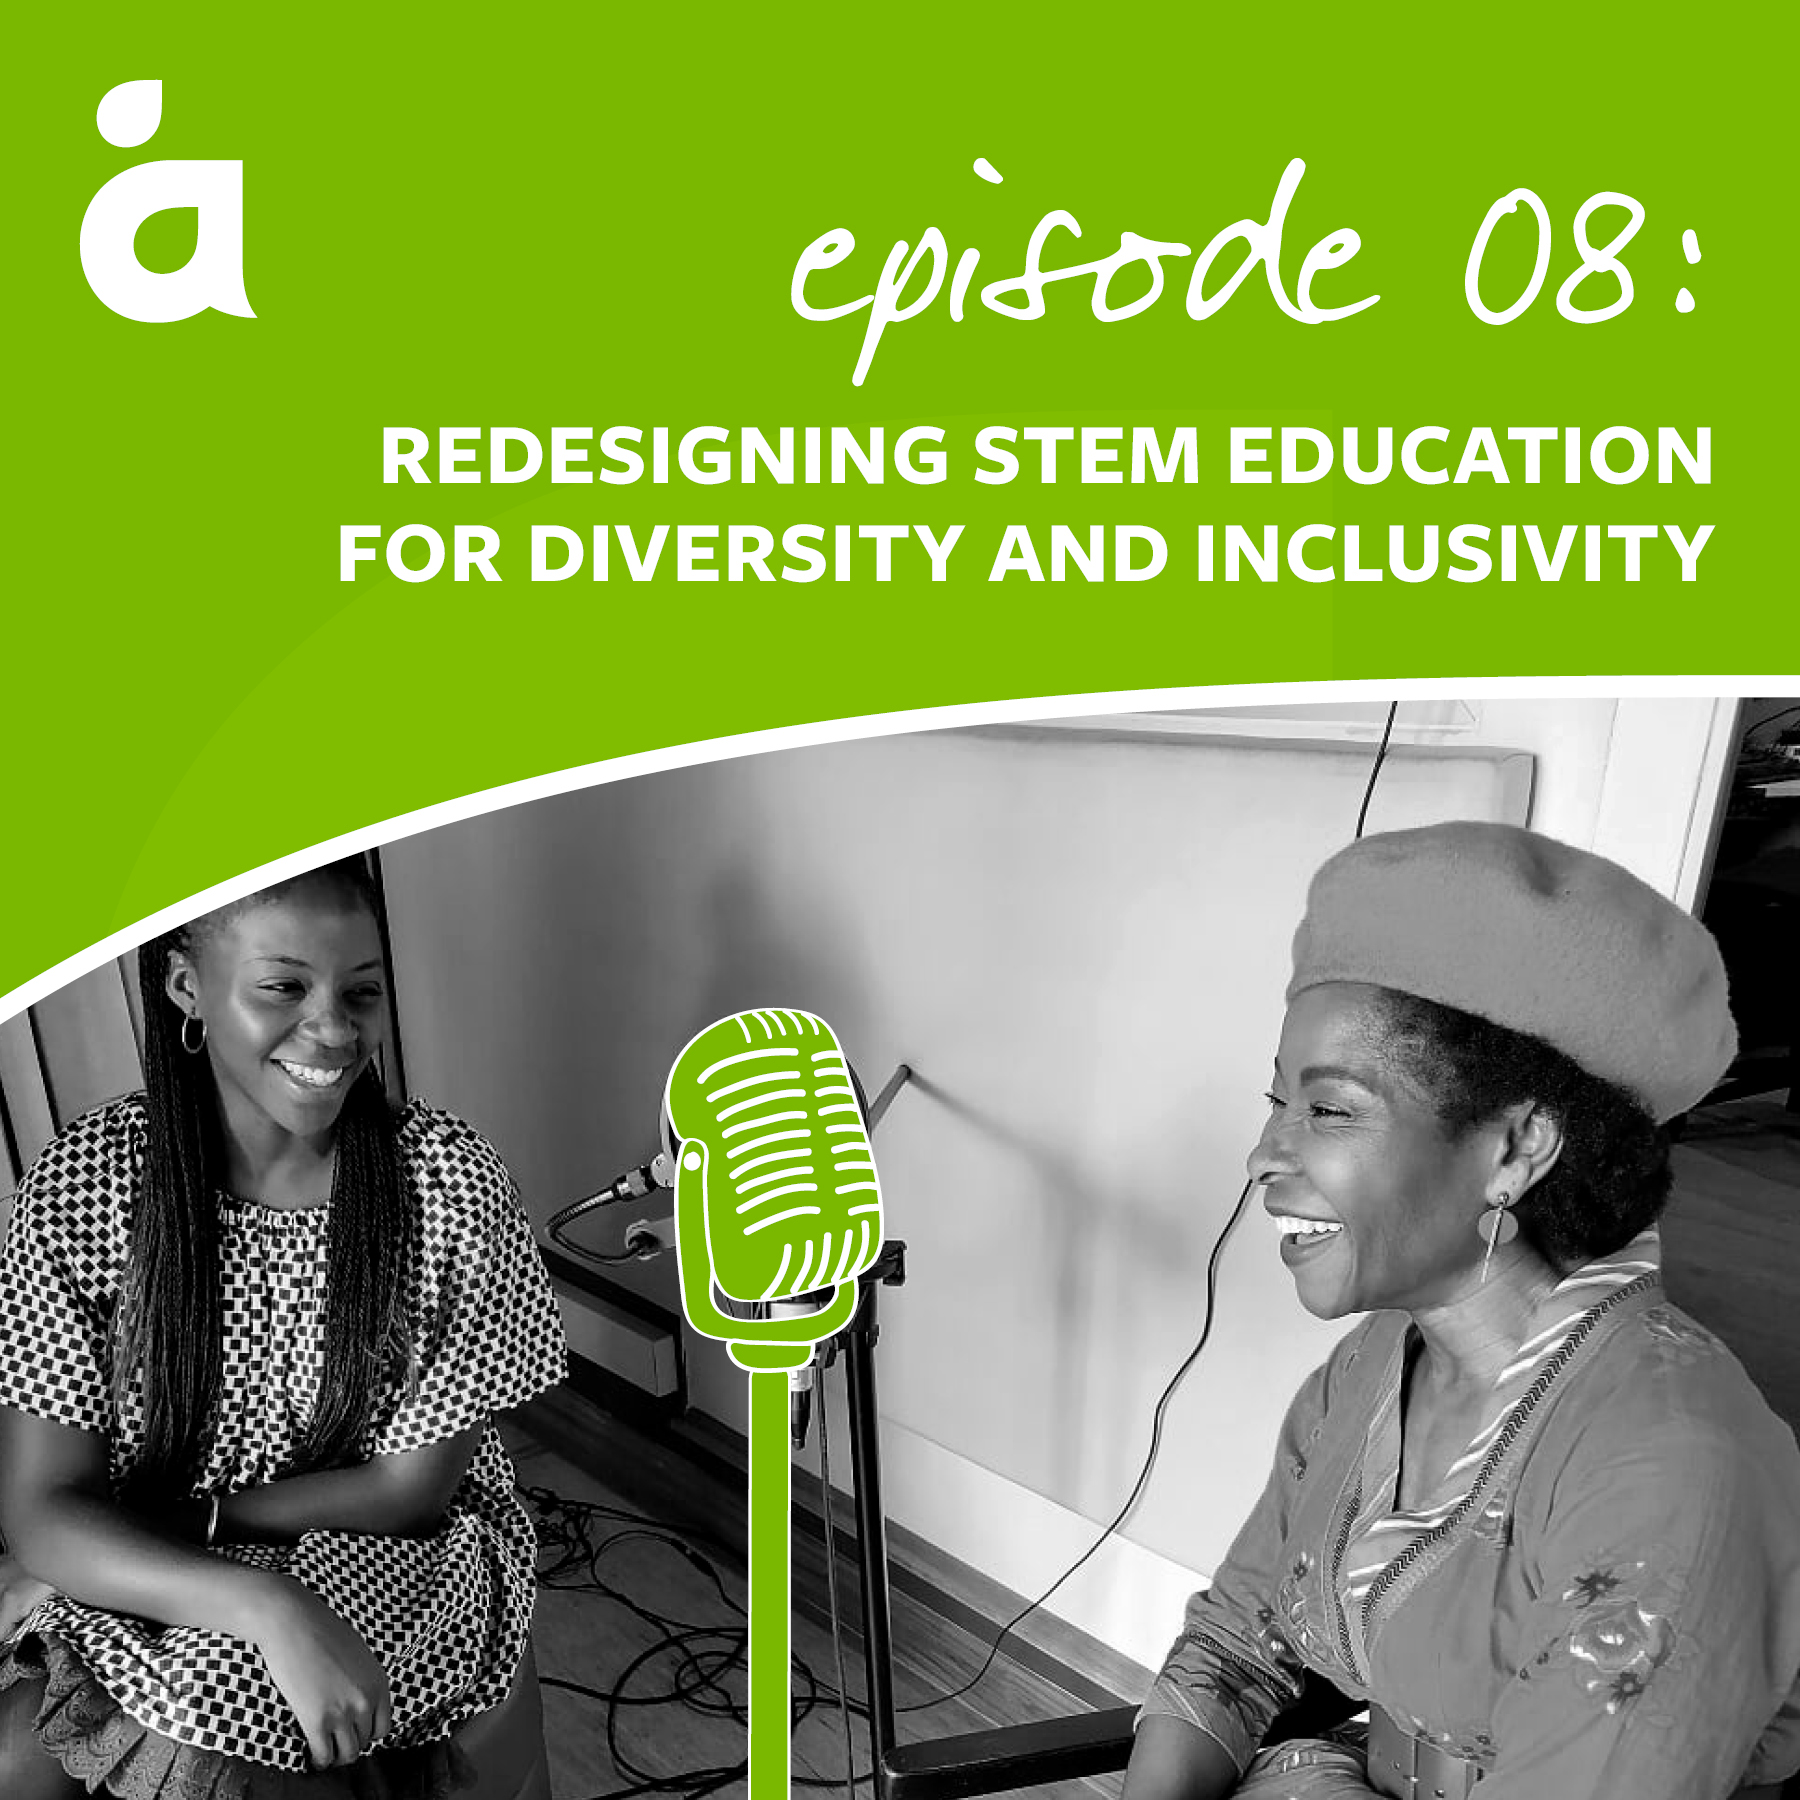 Redesigning STEM education for diversity and inclusivity